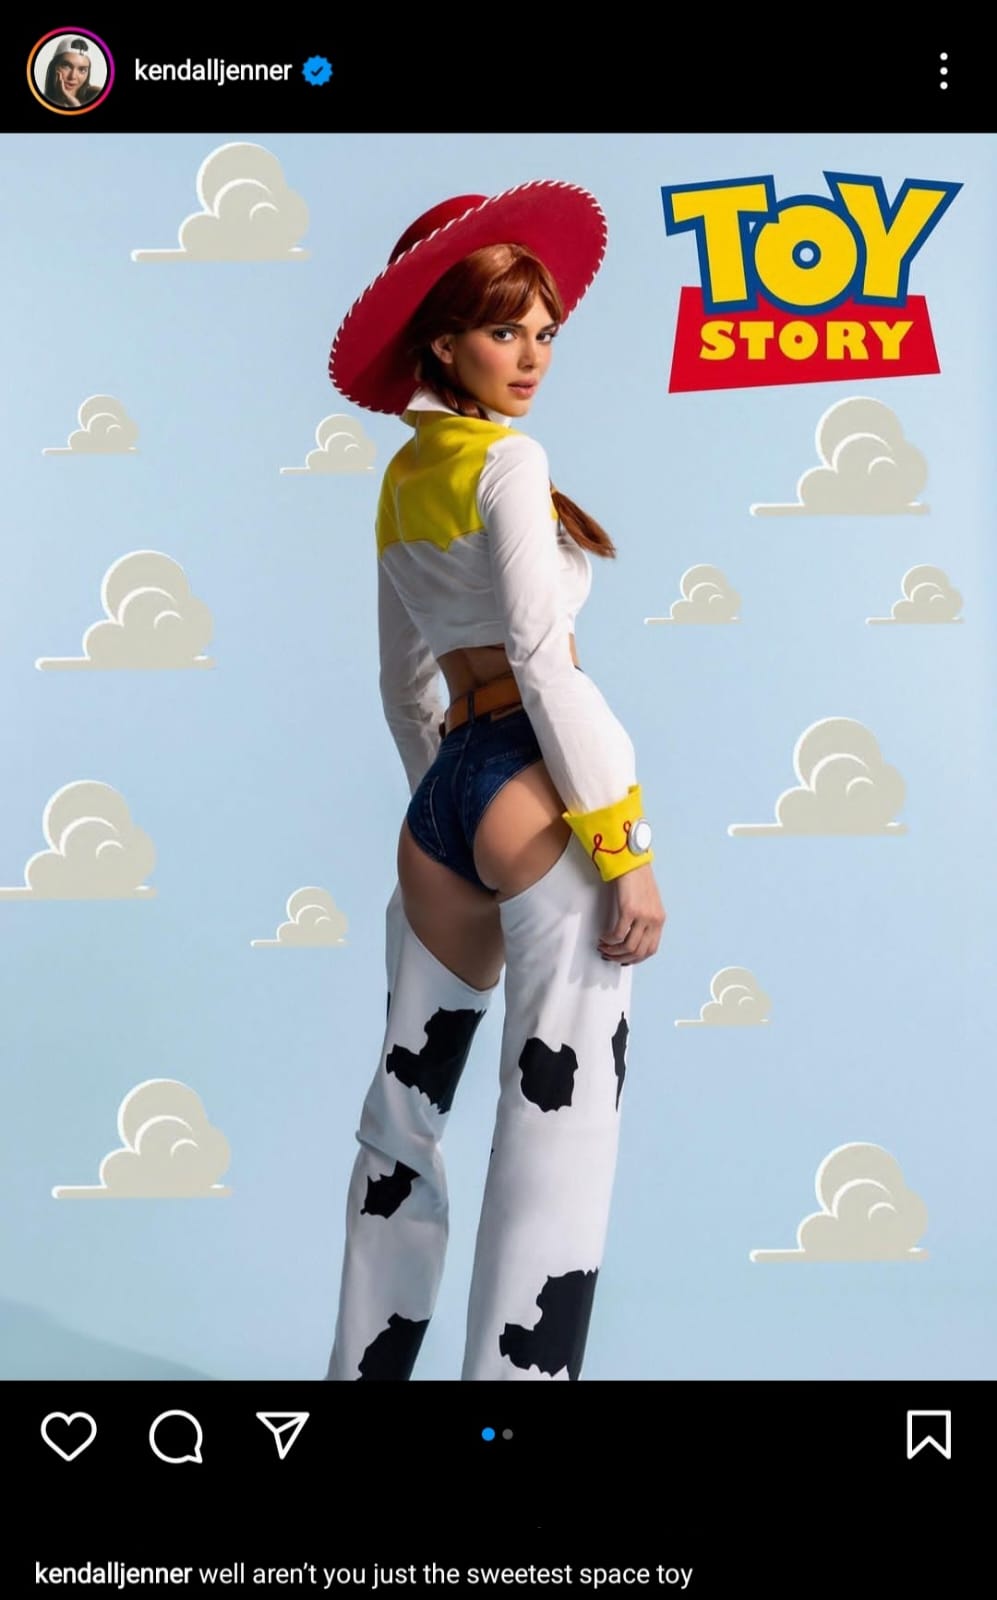 Kendall Jenner as Jessie